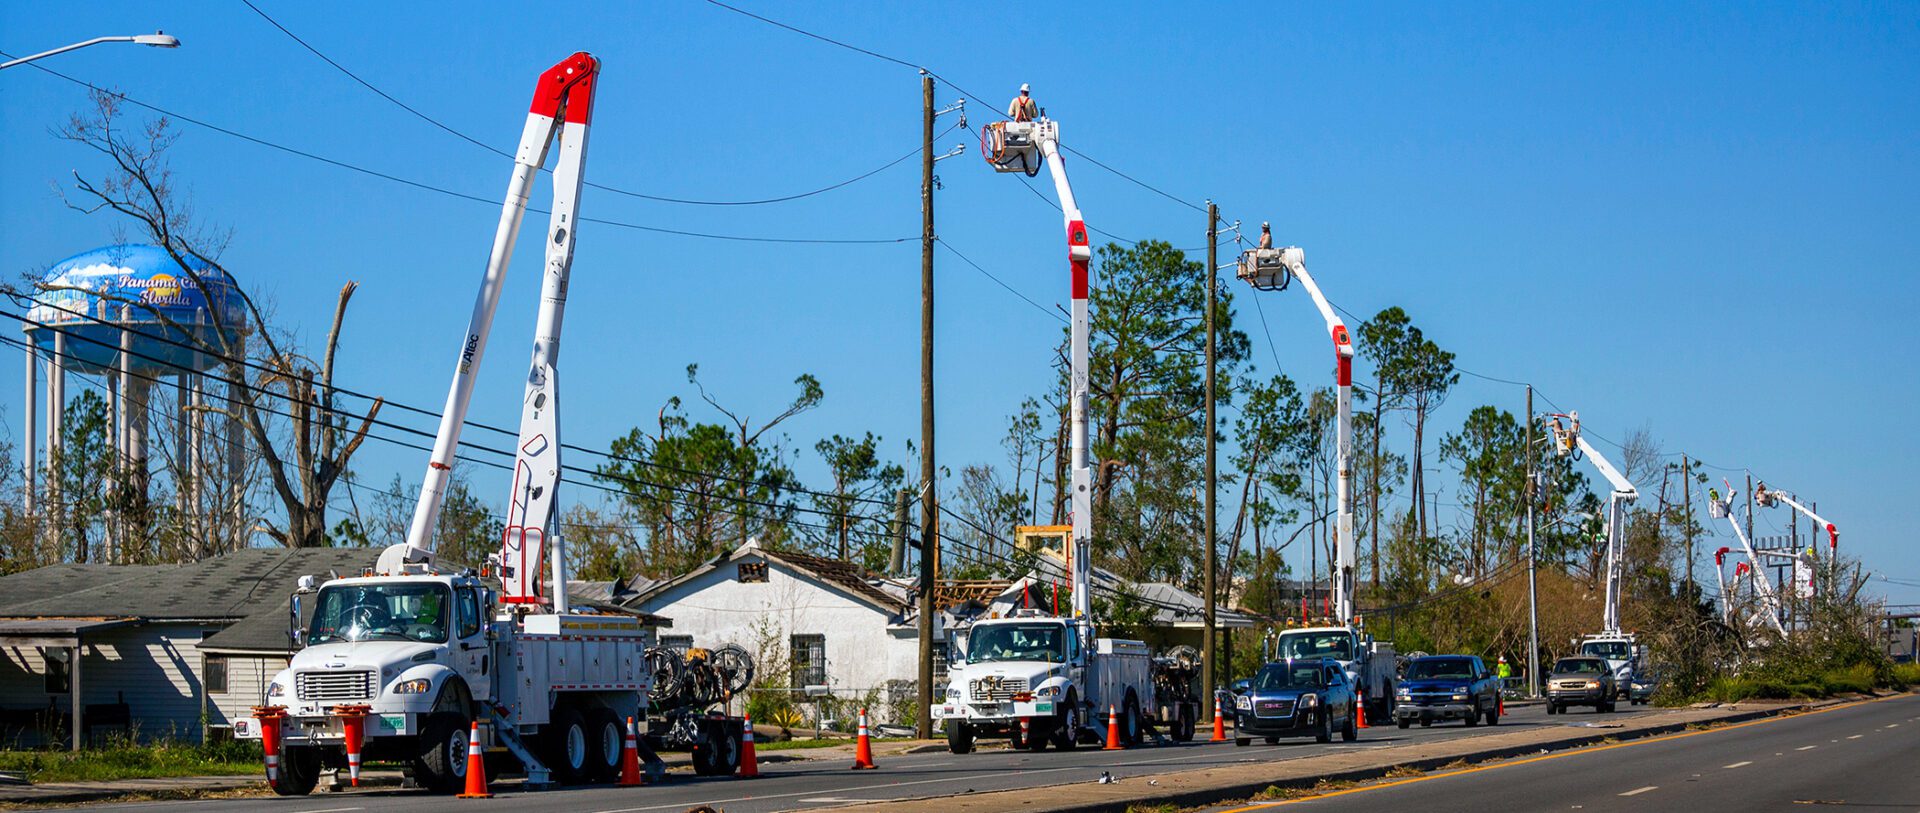 Utility trucks on road with bucket lifts extended